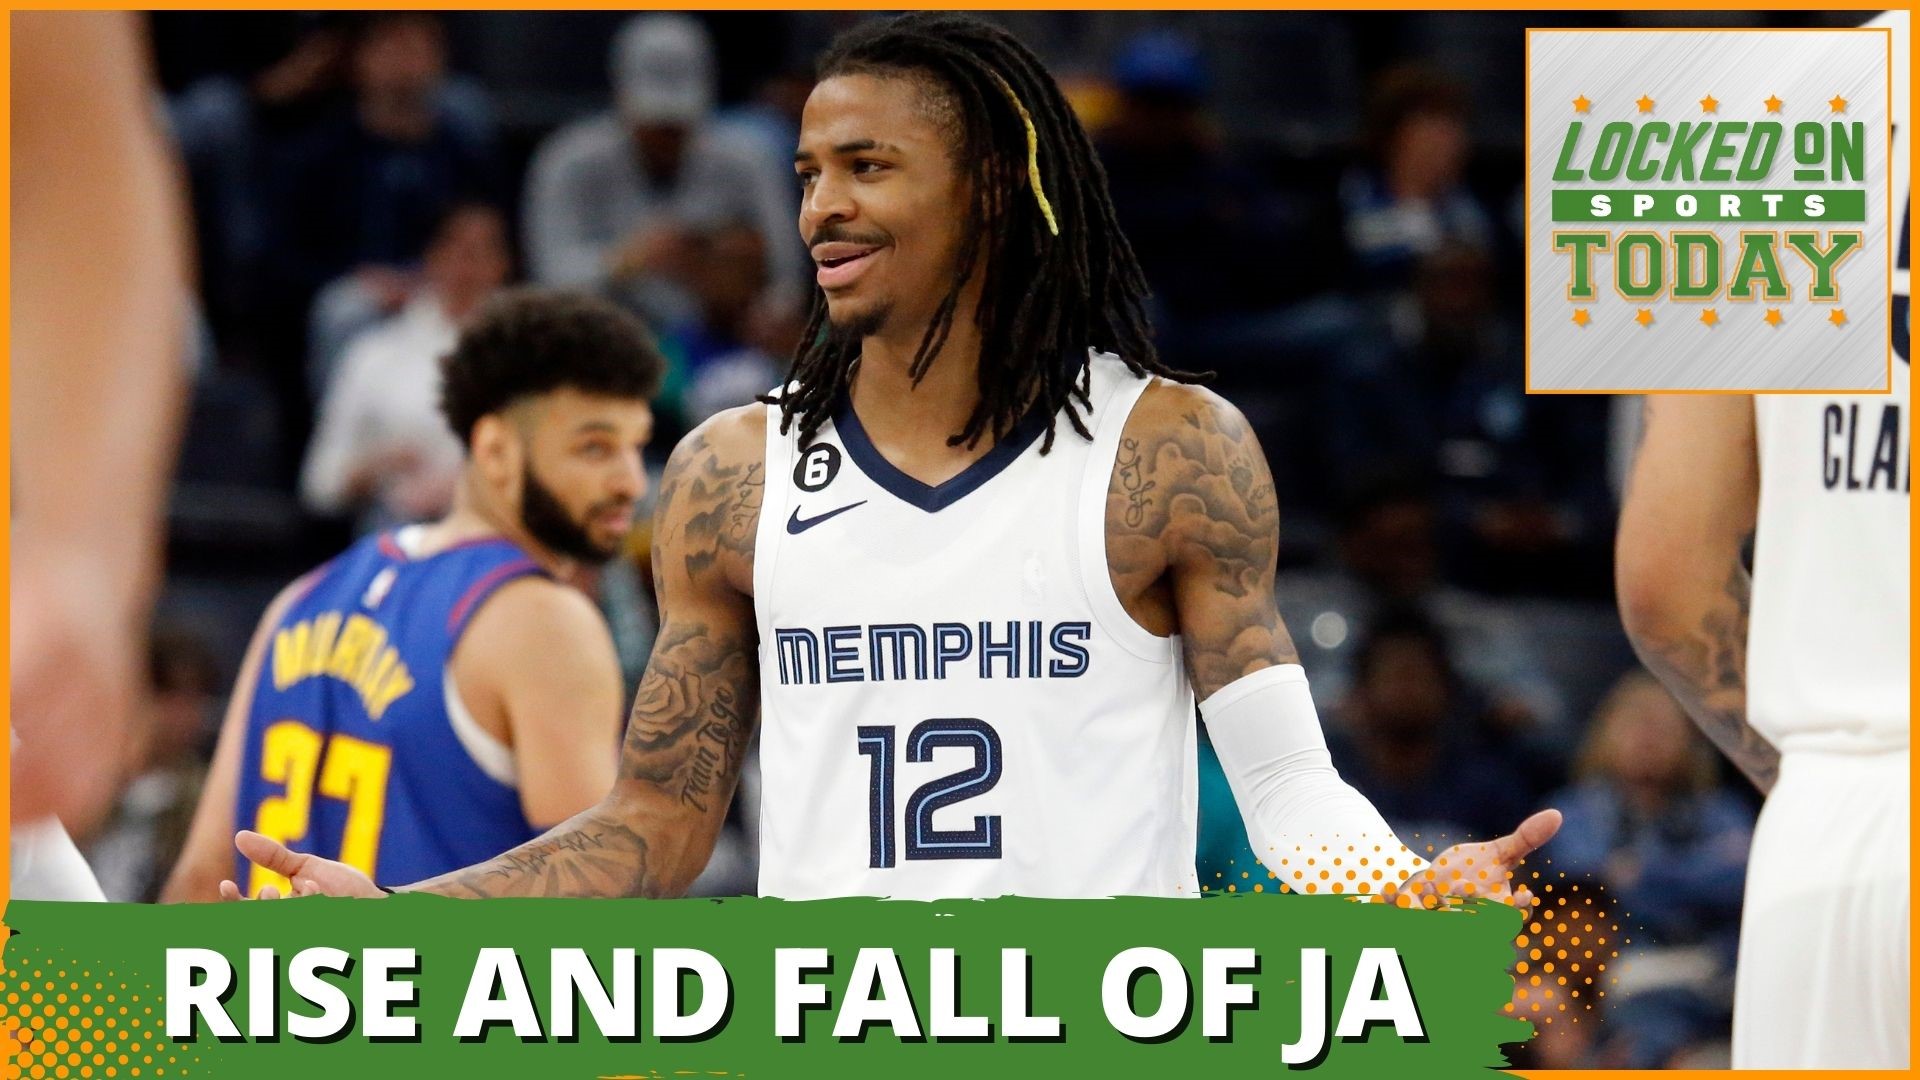 Discussing the day's top sports stories from Ja Morant’s off-the-court trouble to NCAA basketball madness and the Phoenix Suns minus Kevin Durant.